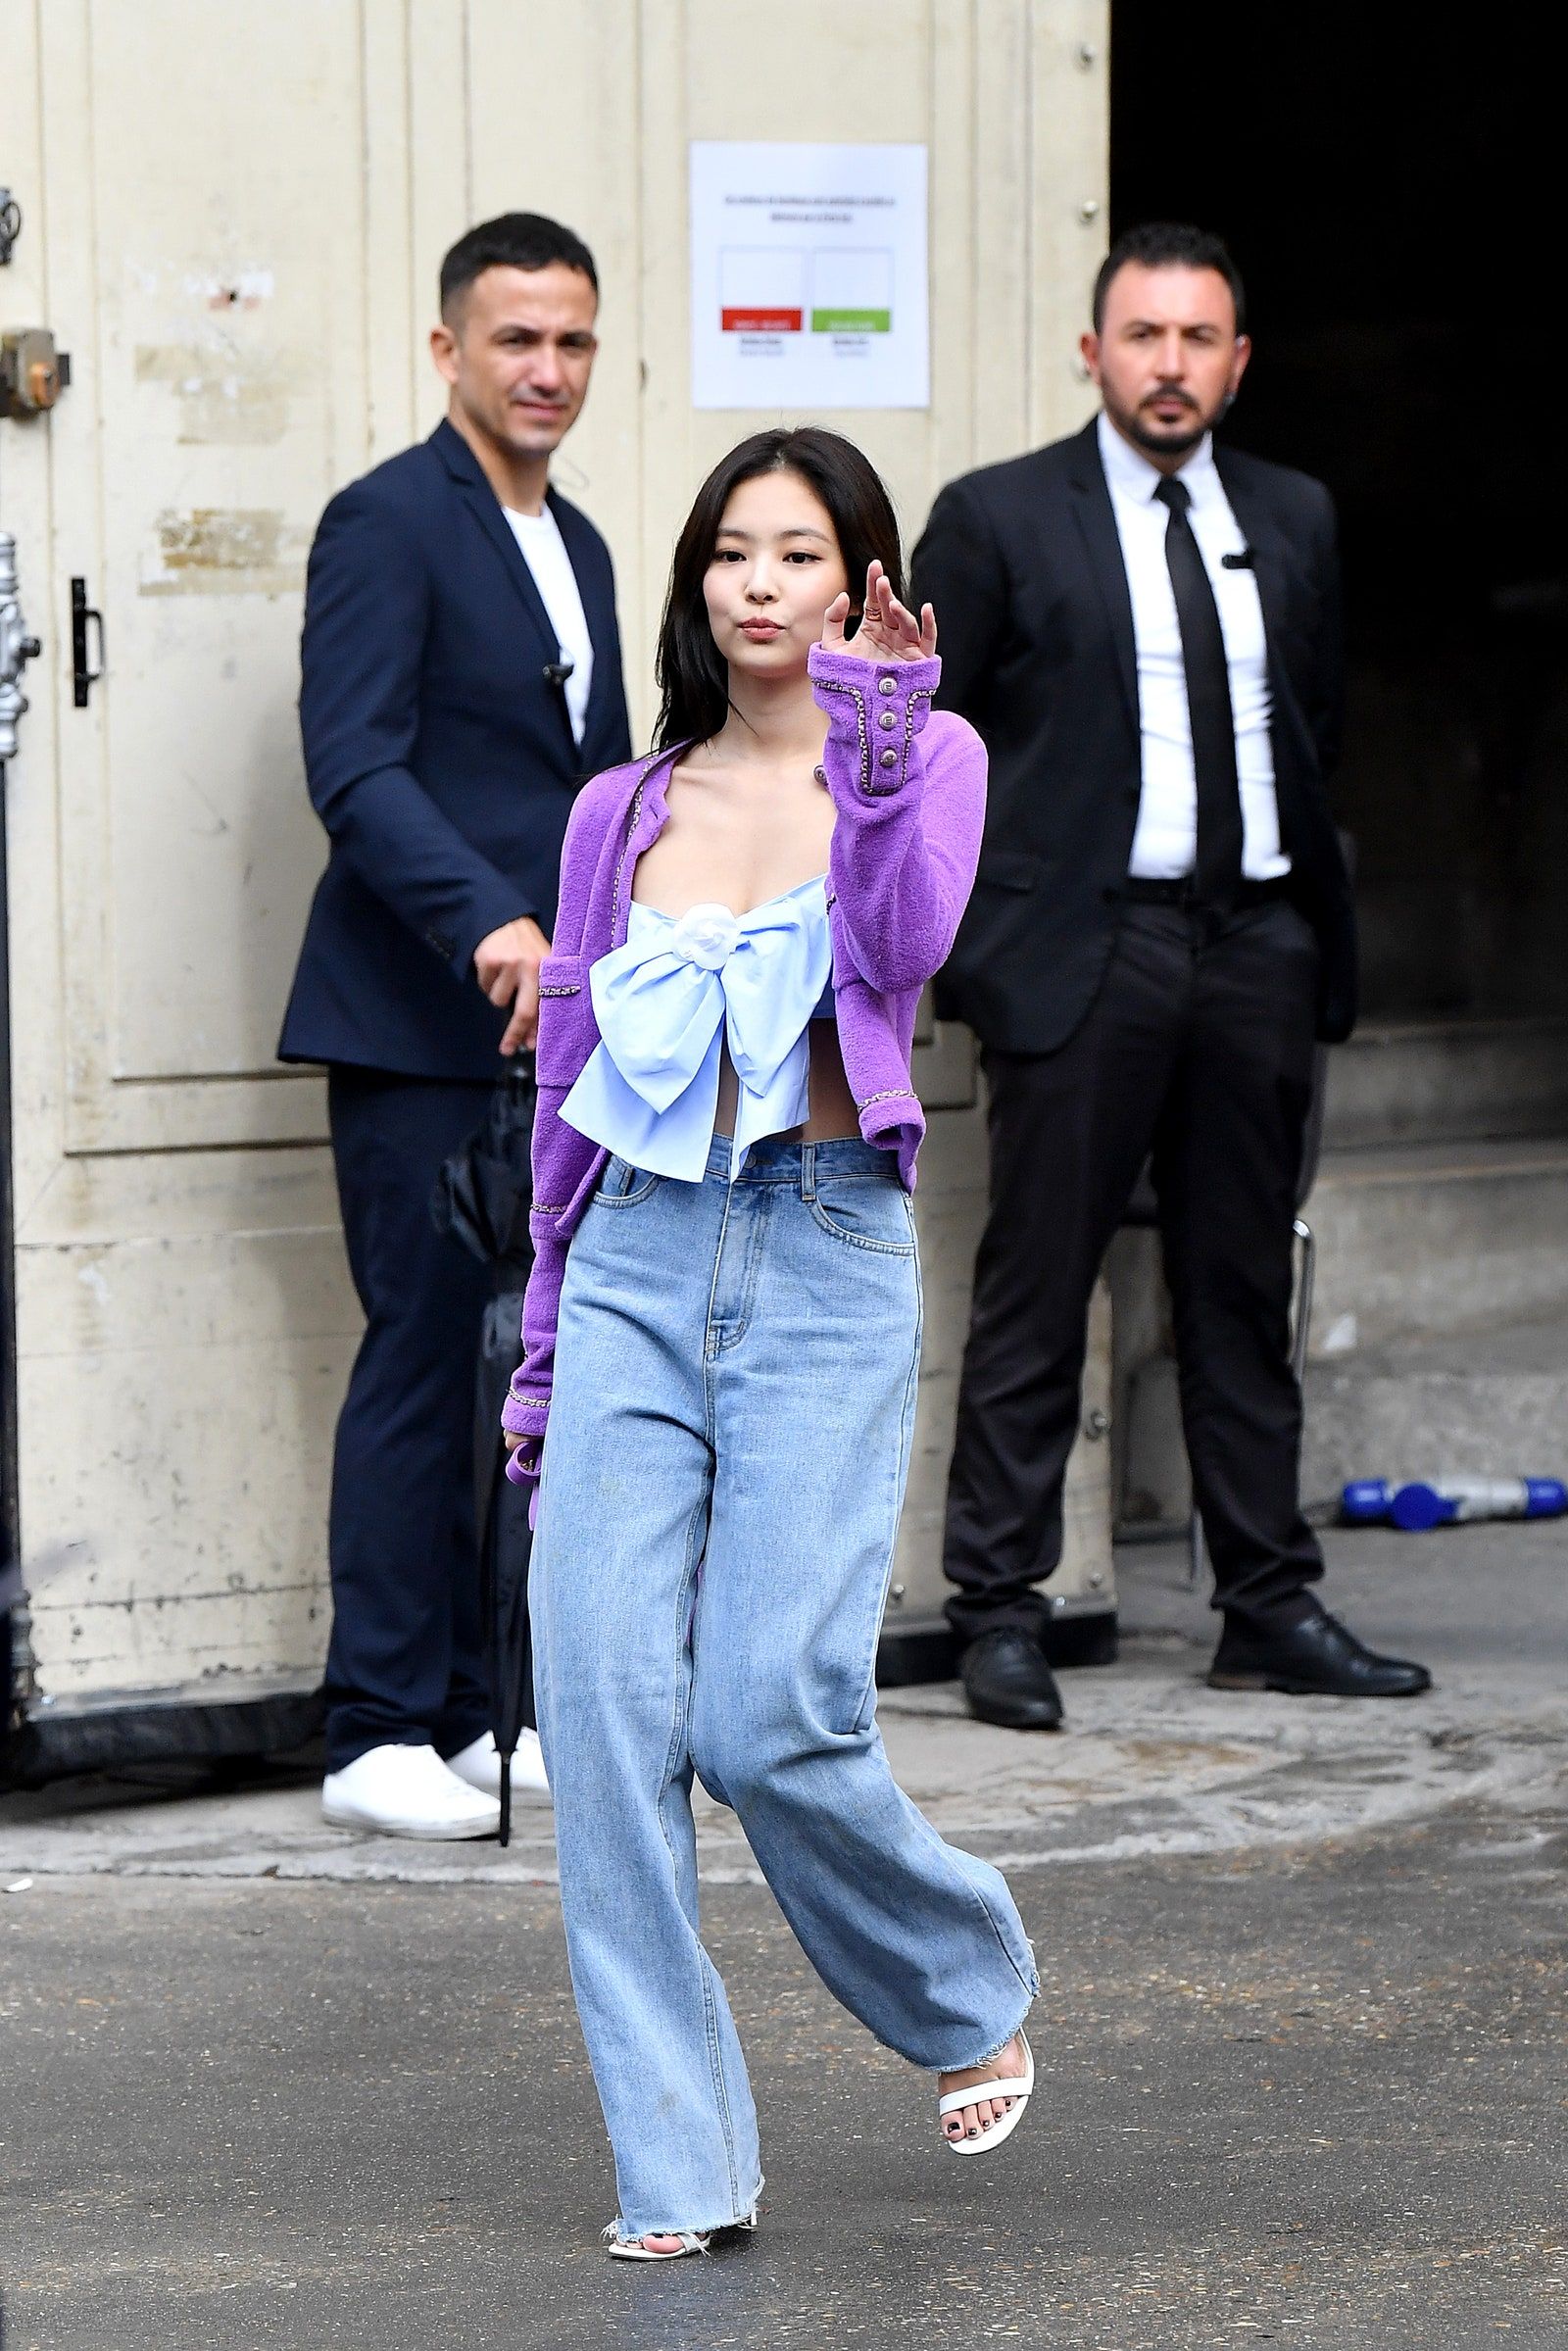 Blackpink's Jennie will be at the Chanel fashion show in Paris: watch it  live